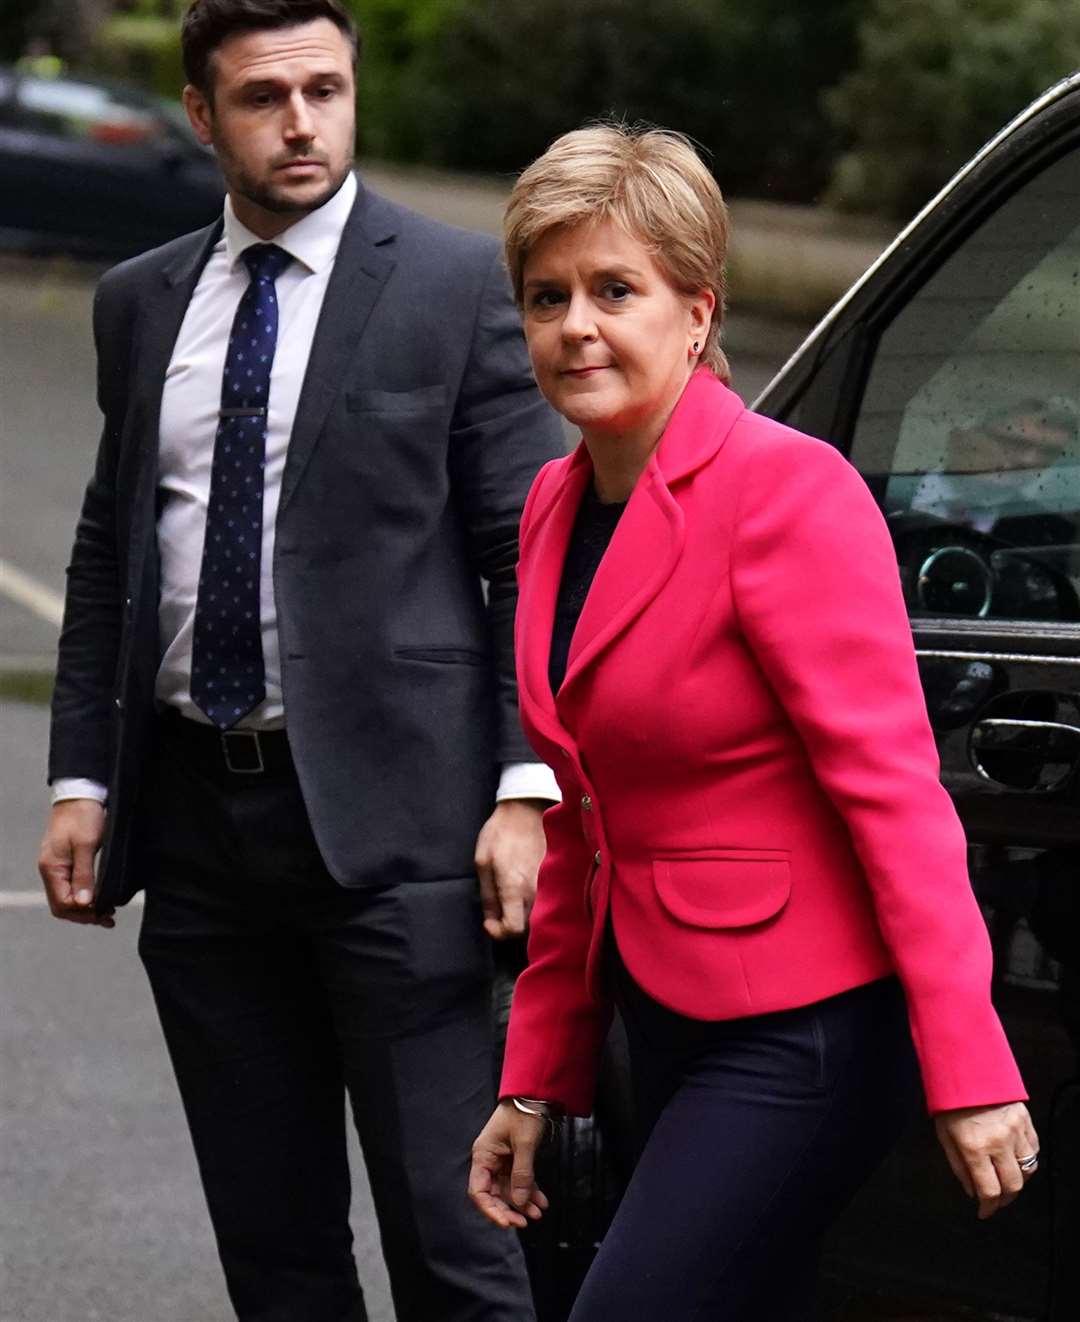 Former first minister of Scotland Nicola Sturgeon arrives to give evidence to the UK Covid-19 Inquiry in London (James Manning/PA)